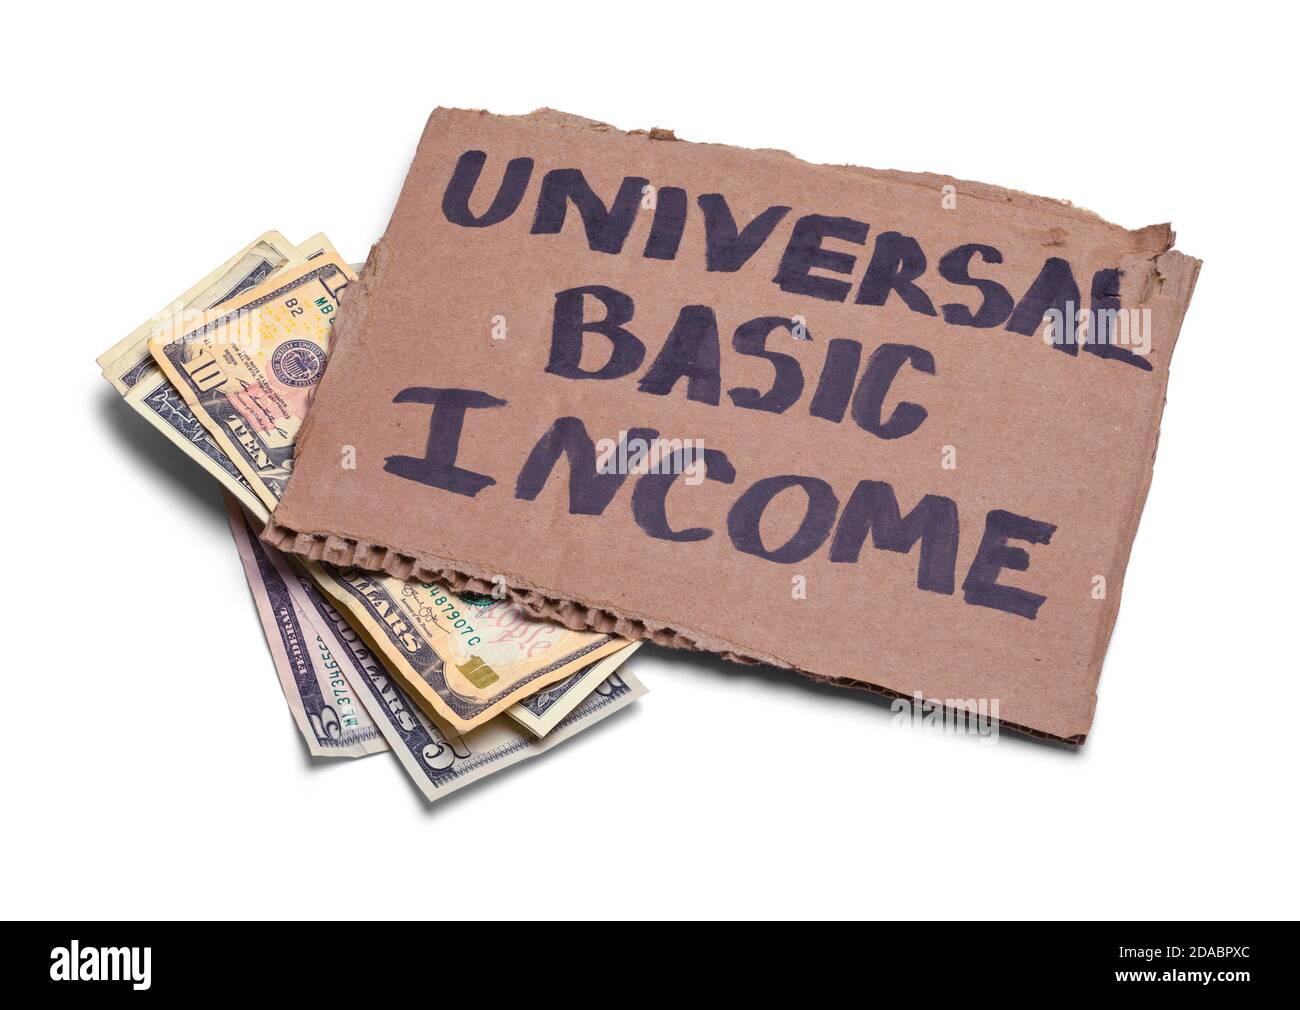 Universal Basic Income Sign with Cash Money. Stock Photo